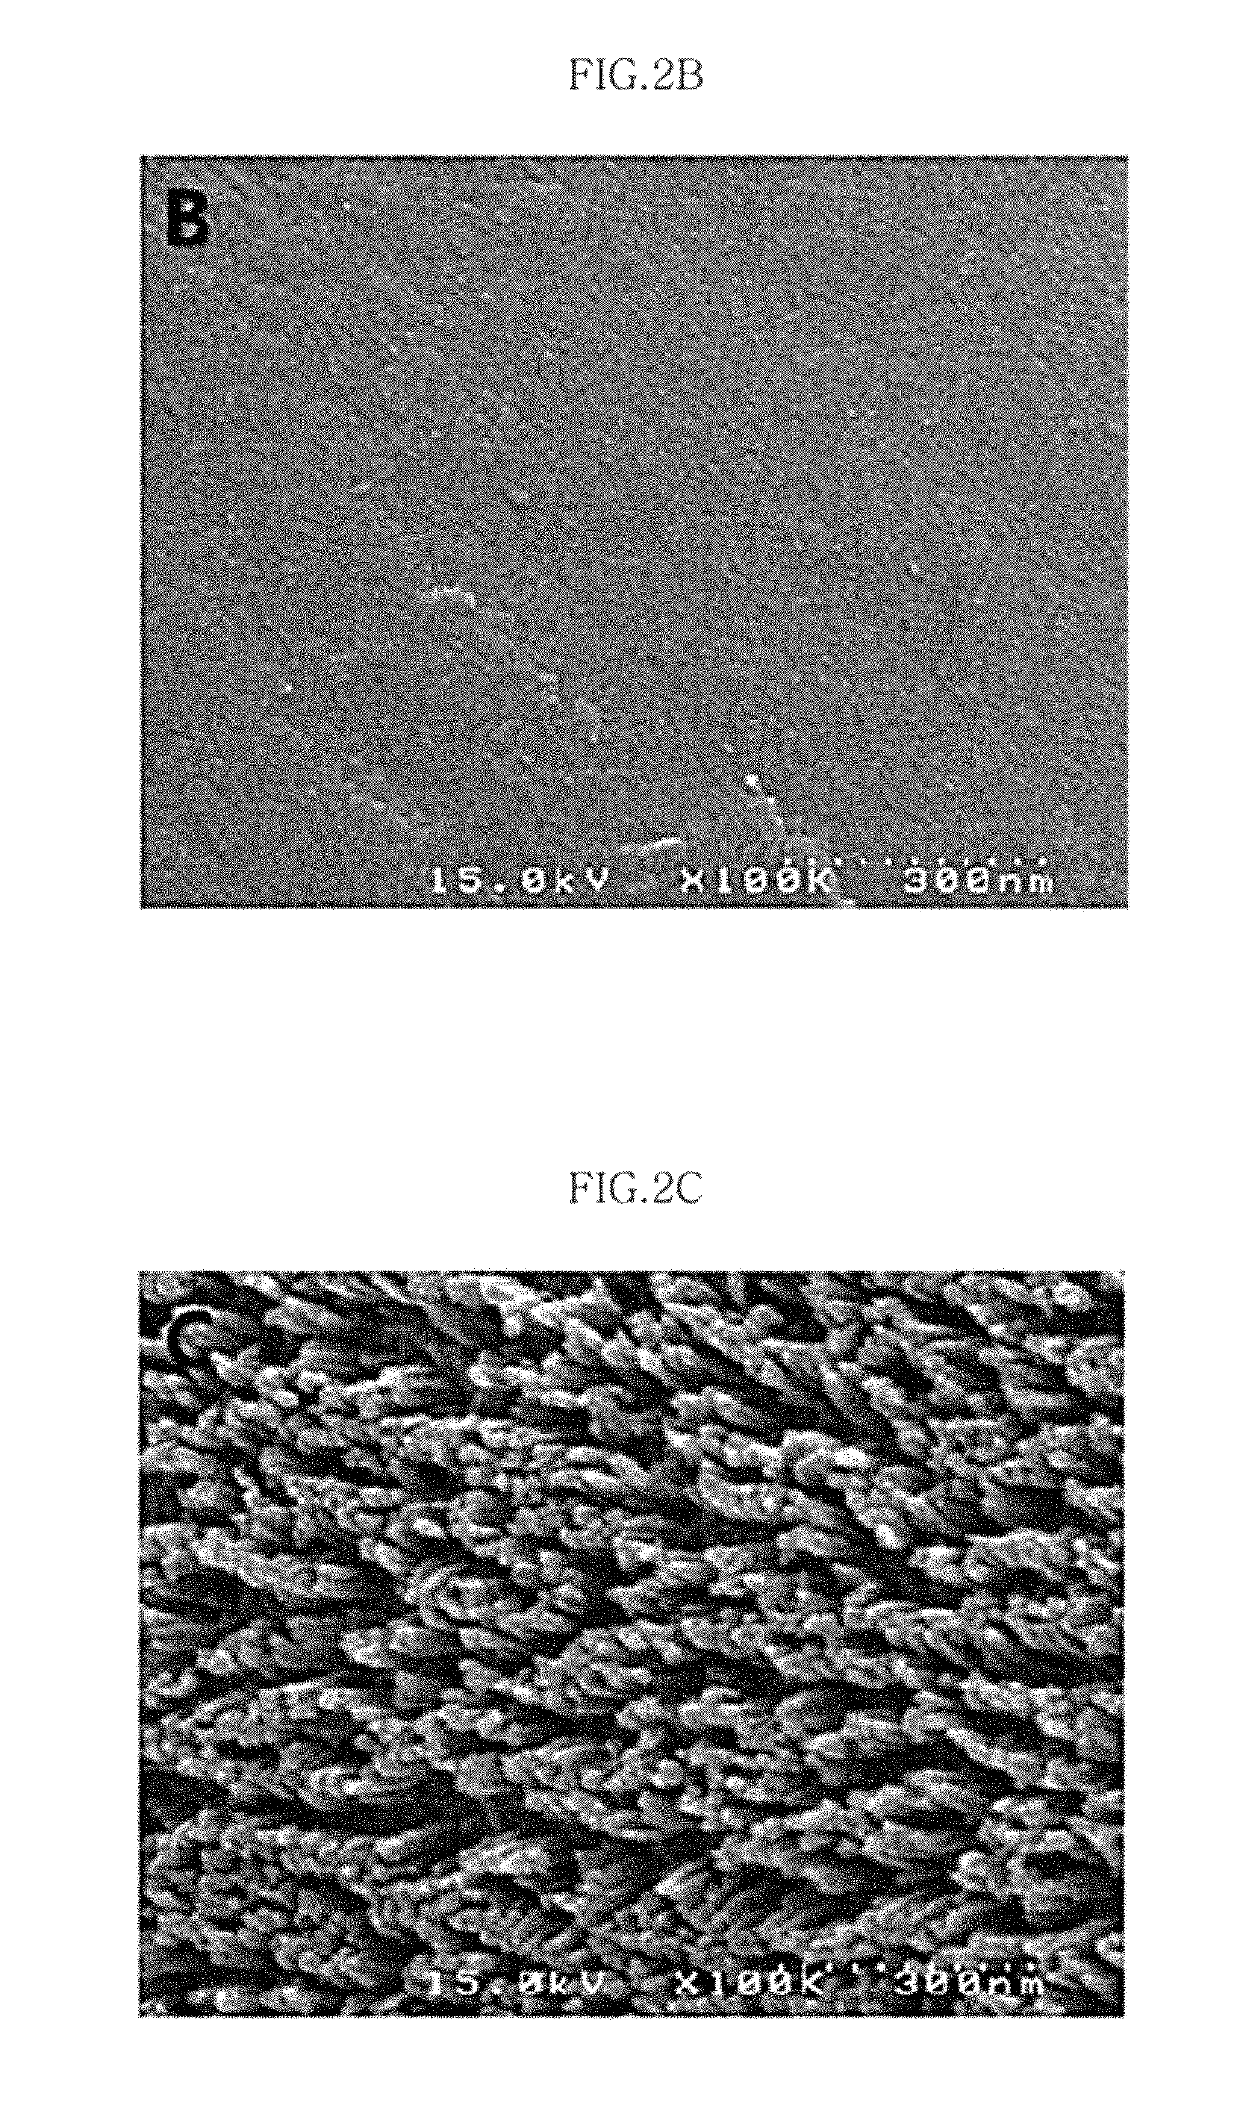 Porous carbon materials and methods of manufacturing the same